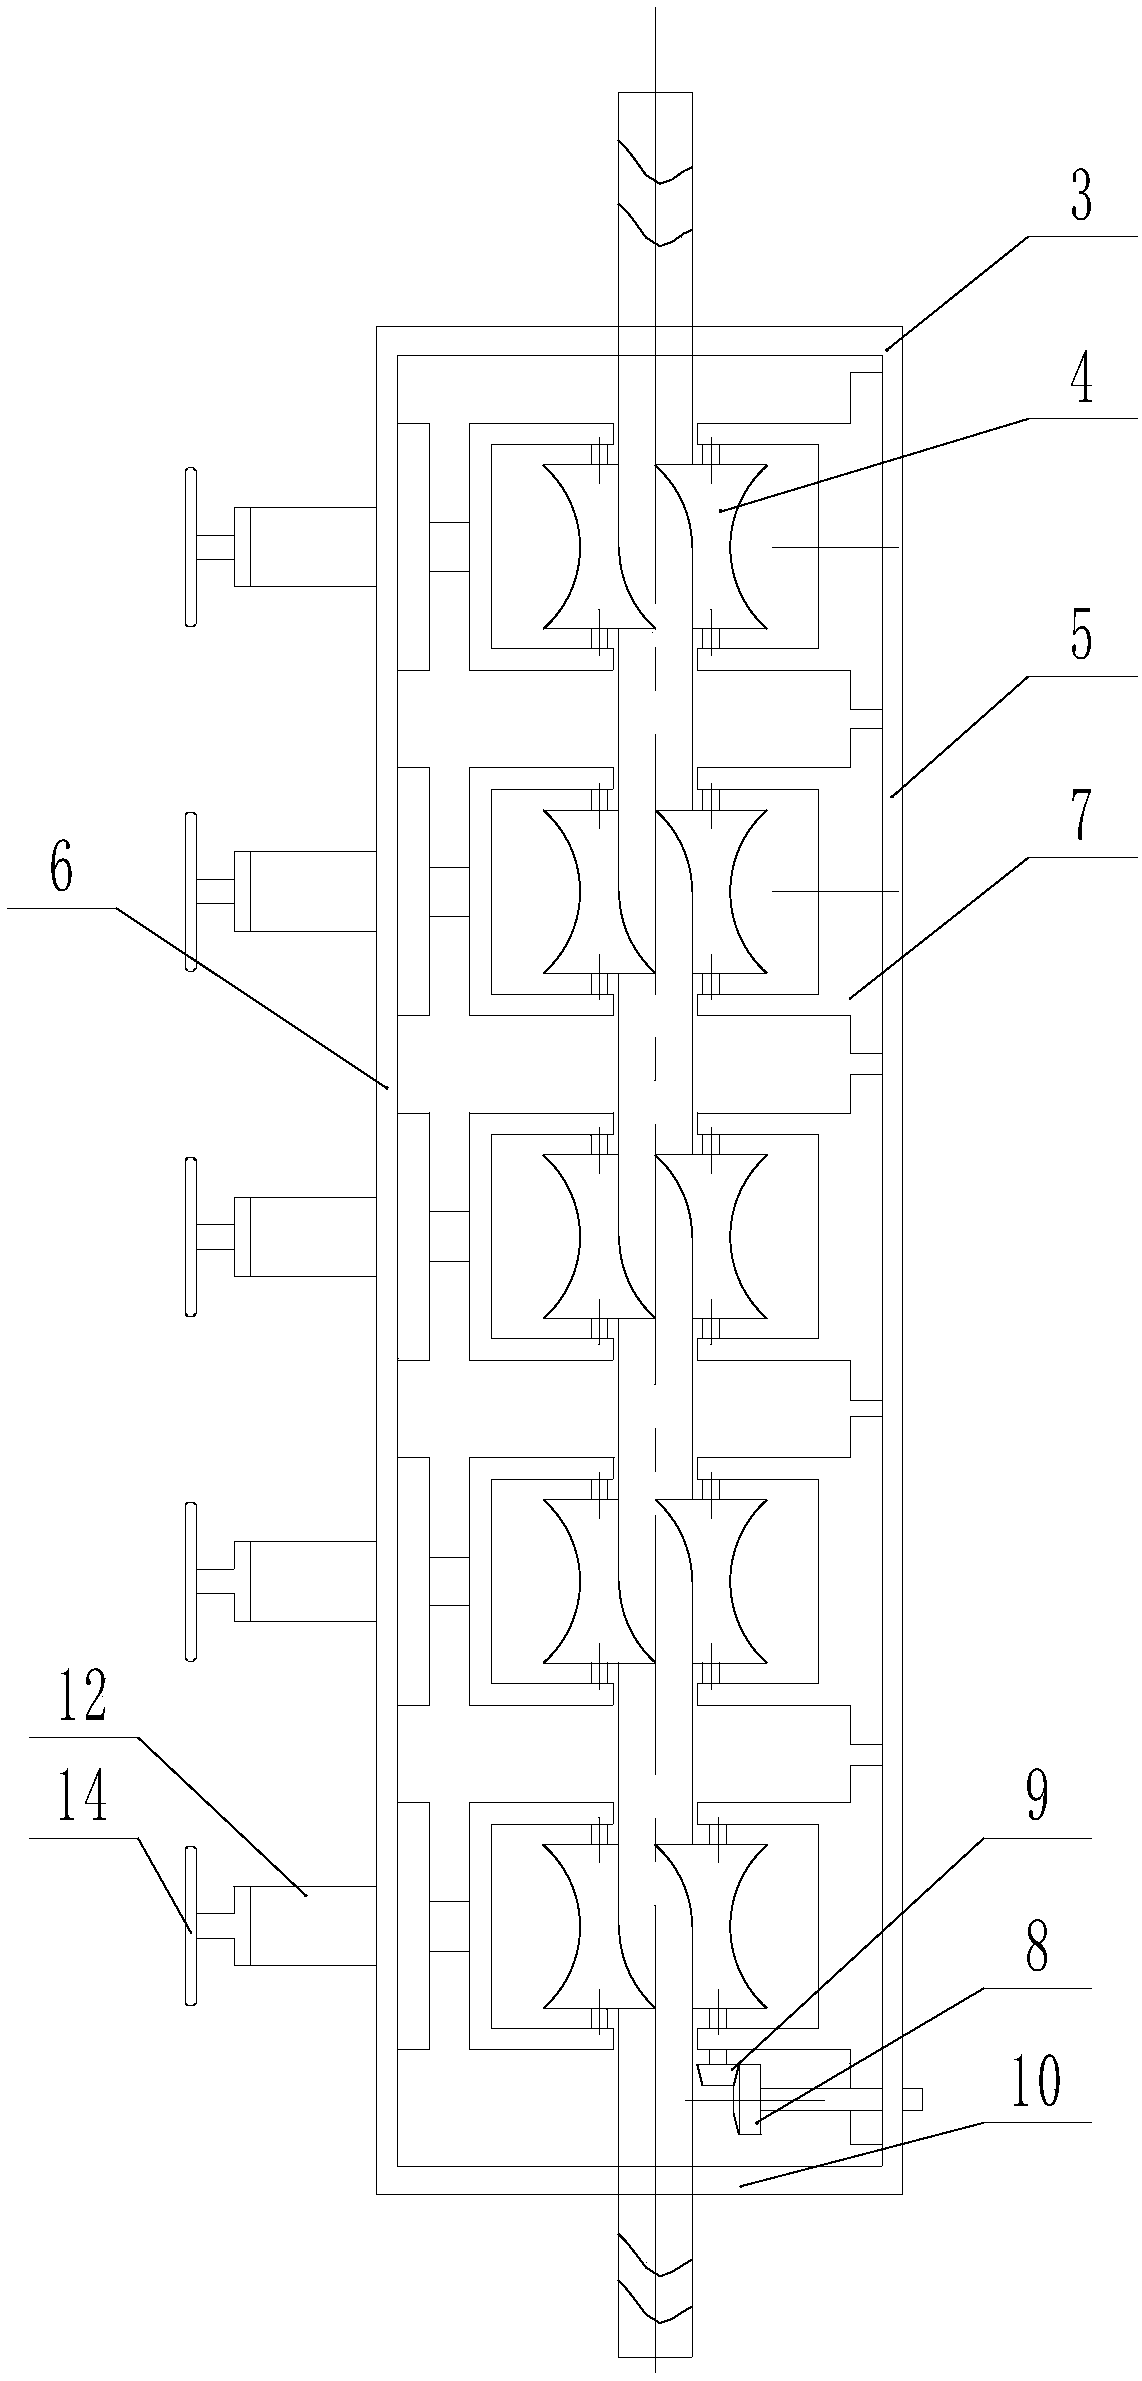 Method for performing rotary feed straightening on metal pipes